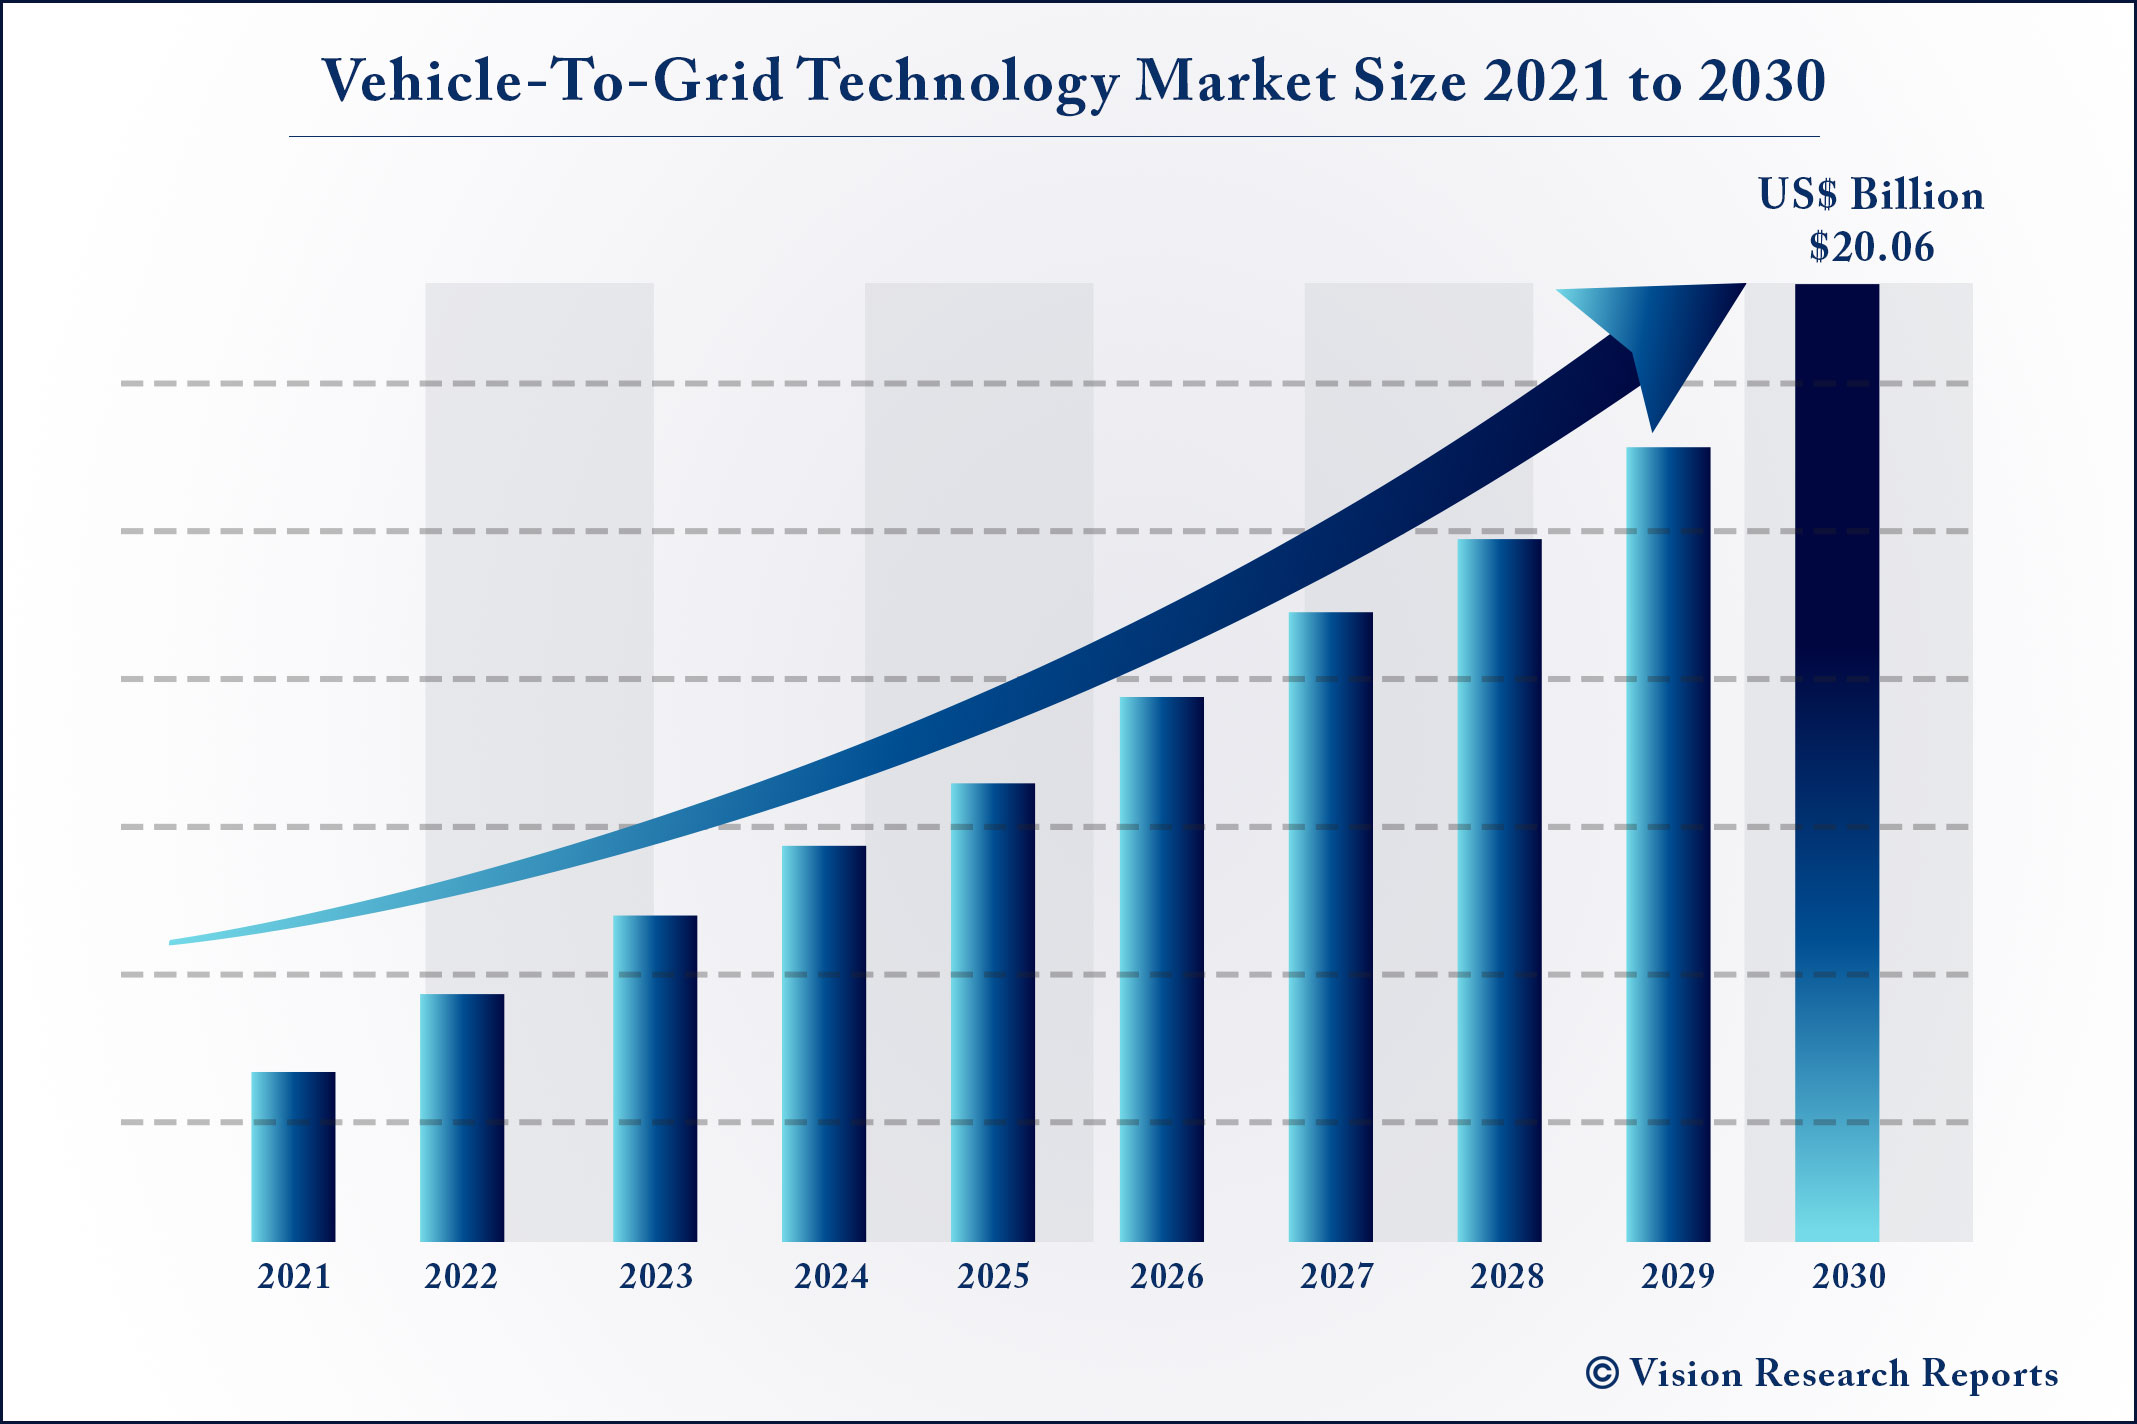 Vehicle-To-Grid Technology Market Size 2021 to 2030